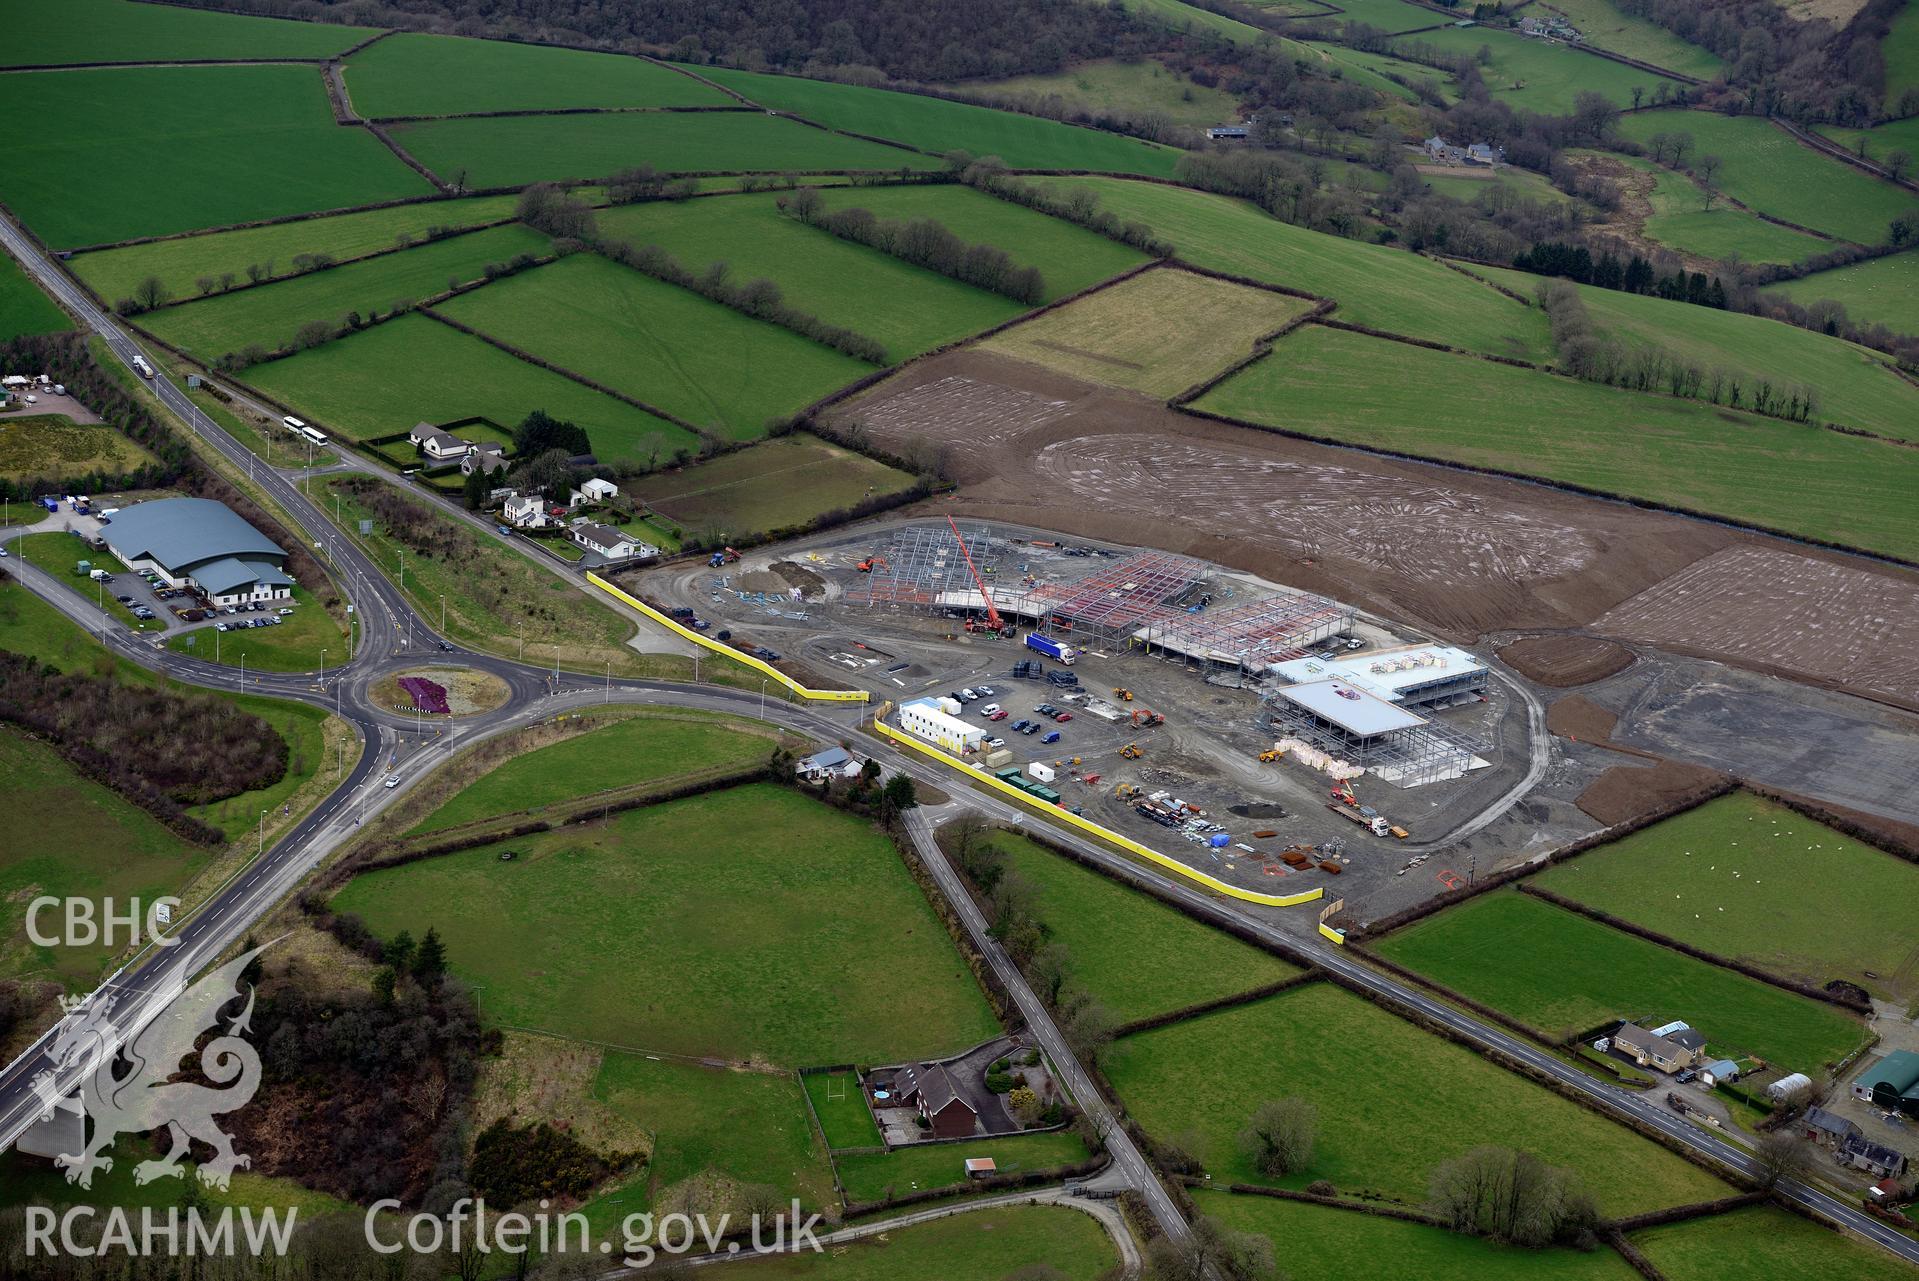 Ysgol Bro Teifi under construction and the A486 Llandysul bypass, on the northern outskirts of Llandysul. Oblique aerial photograph taken during the Royal Commission's programme of archaeological aerial reconnaissance by Toby Driver on 13th March 2015.